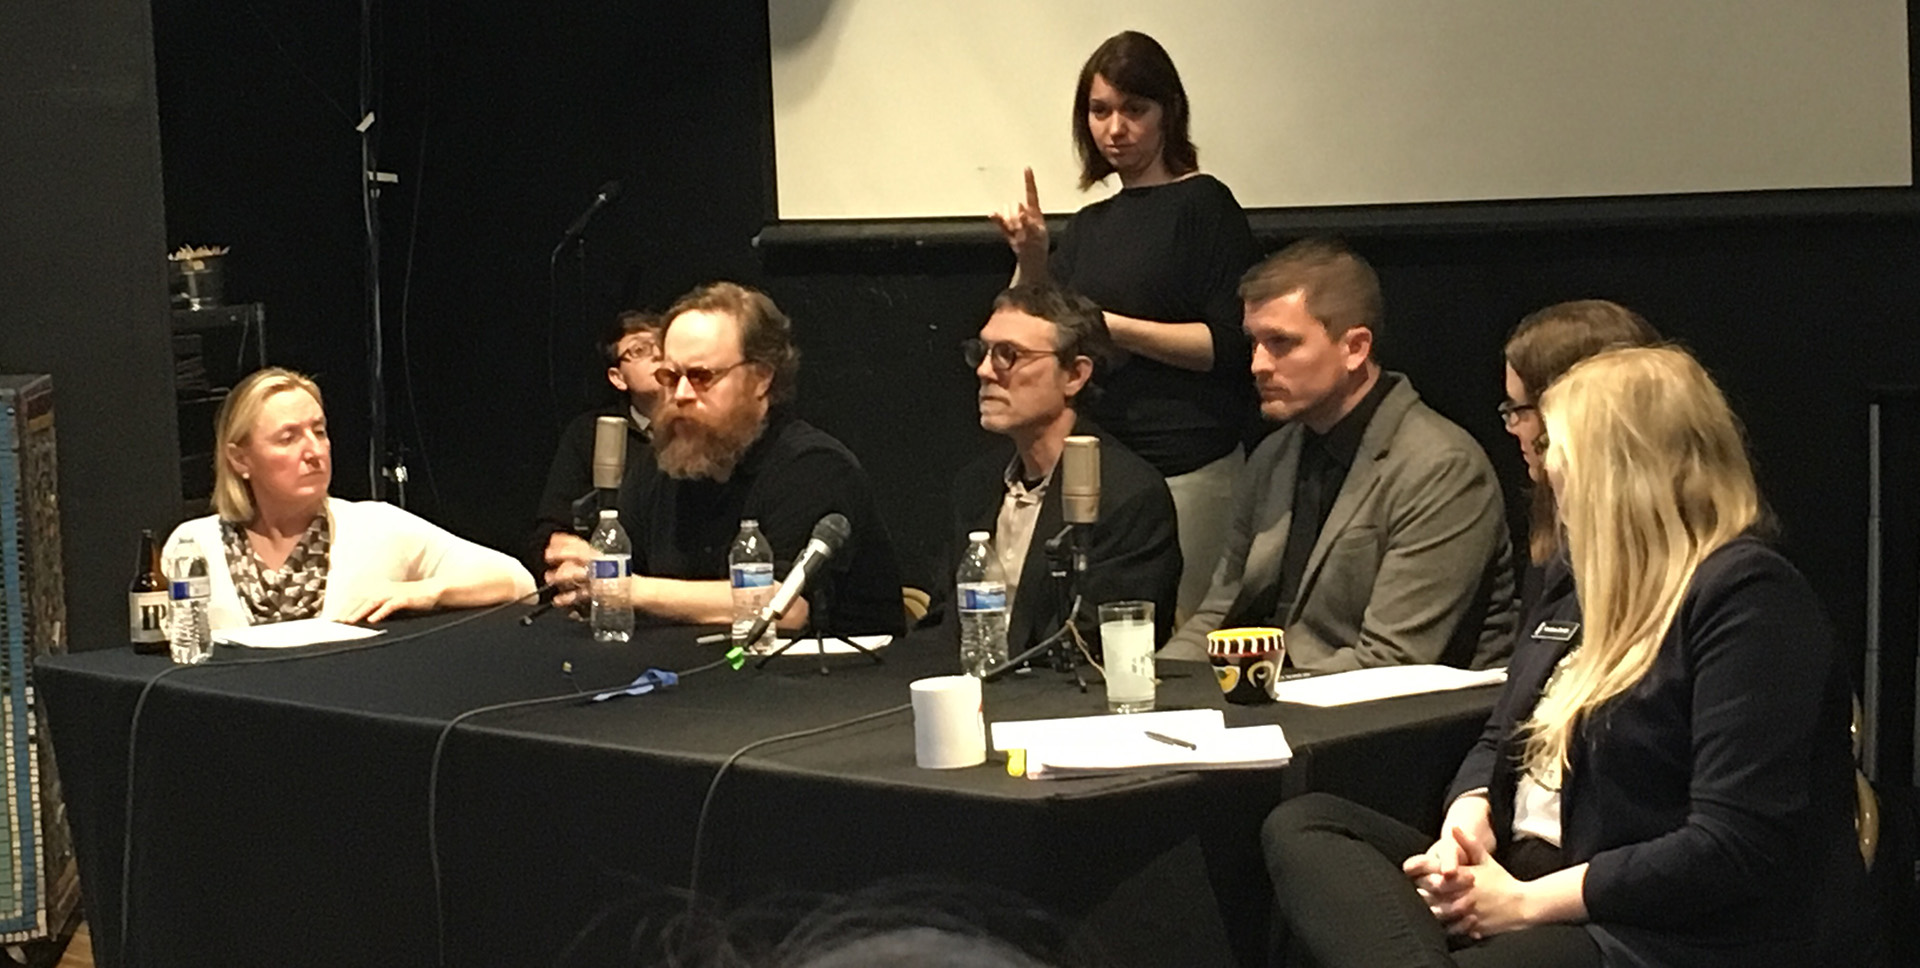 Artists at a panel discussion with an ASL interpreter behind them.